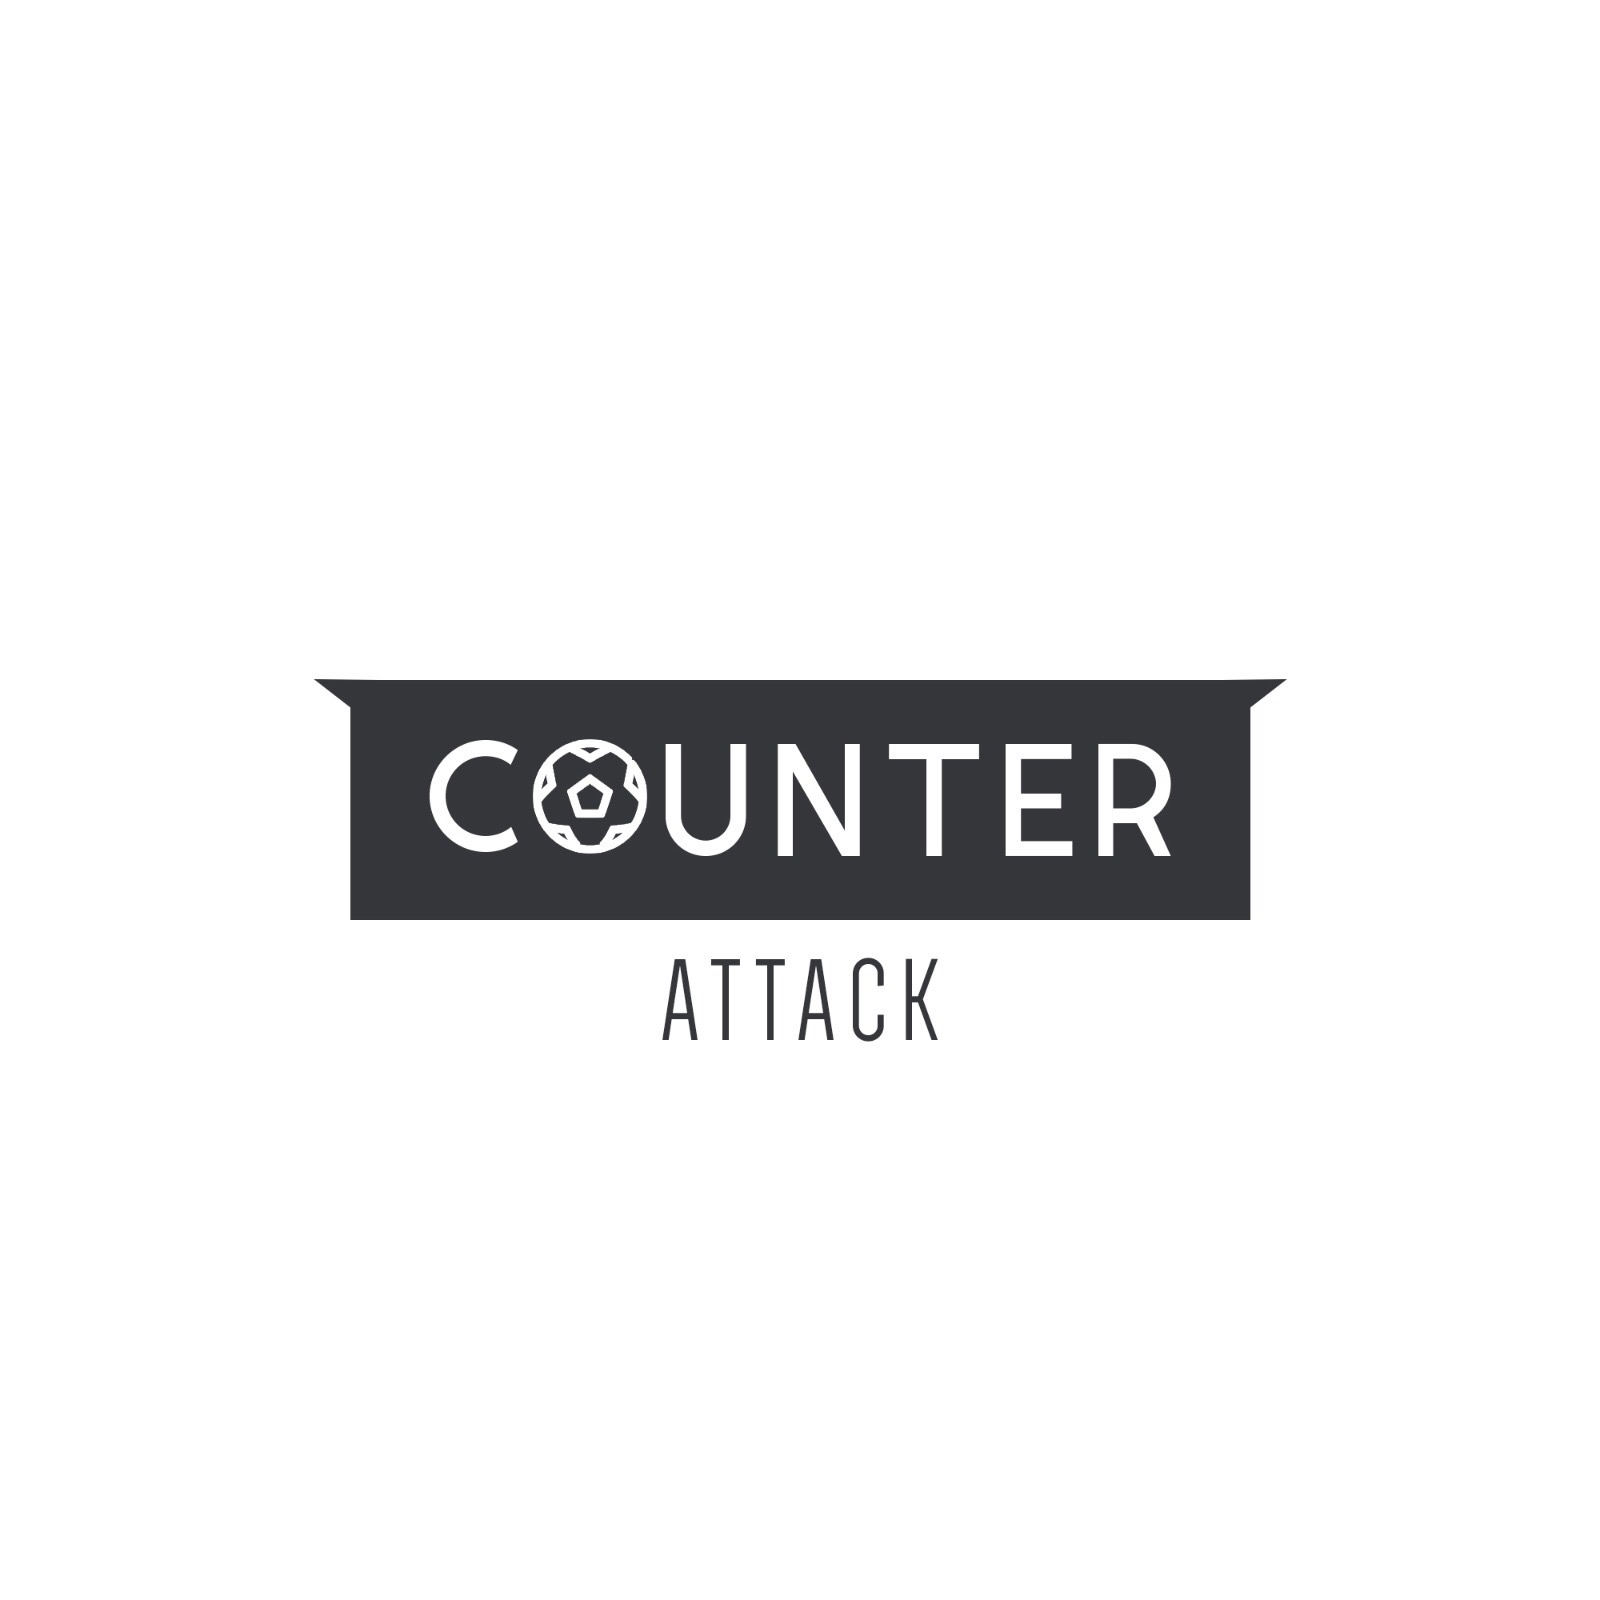 Counter Attack - Episode 147 - Tyrhys Dolan a Kid In The Playground